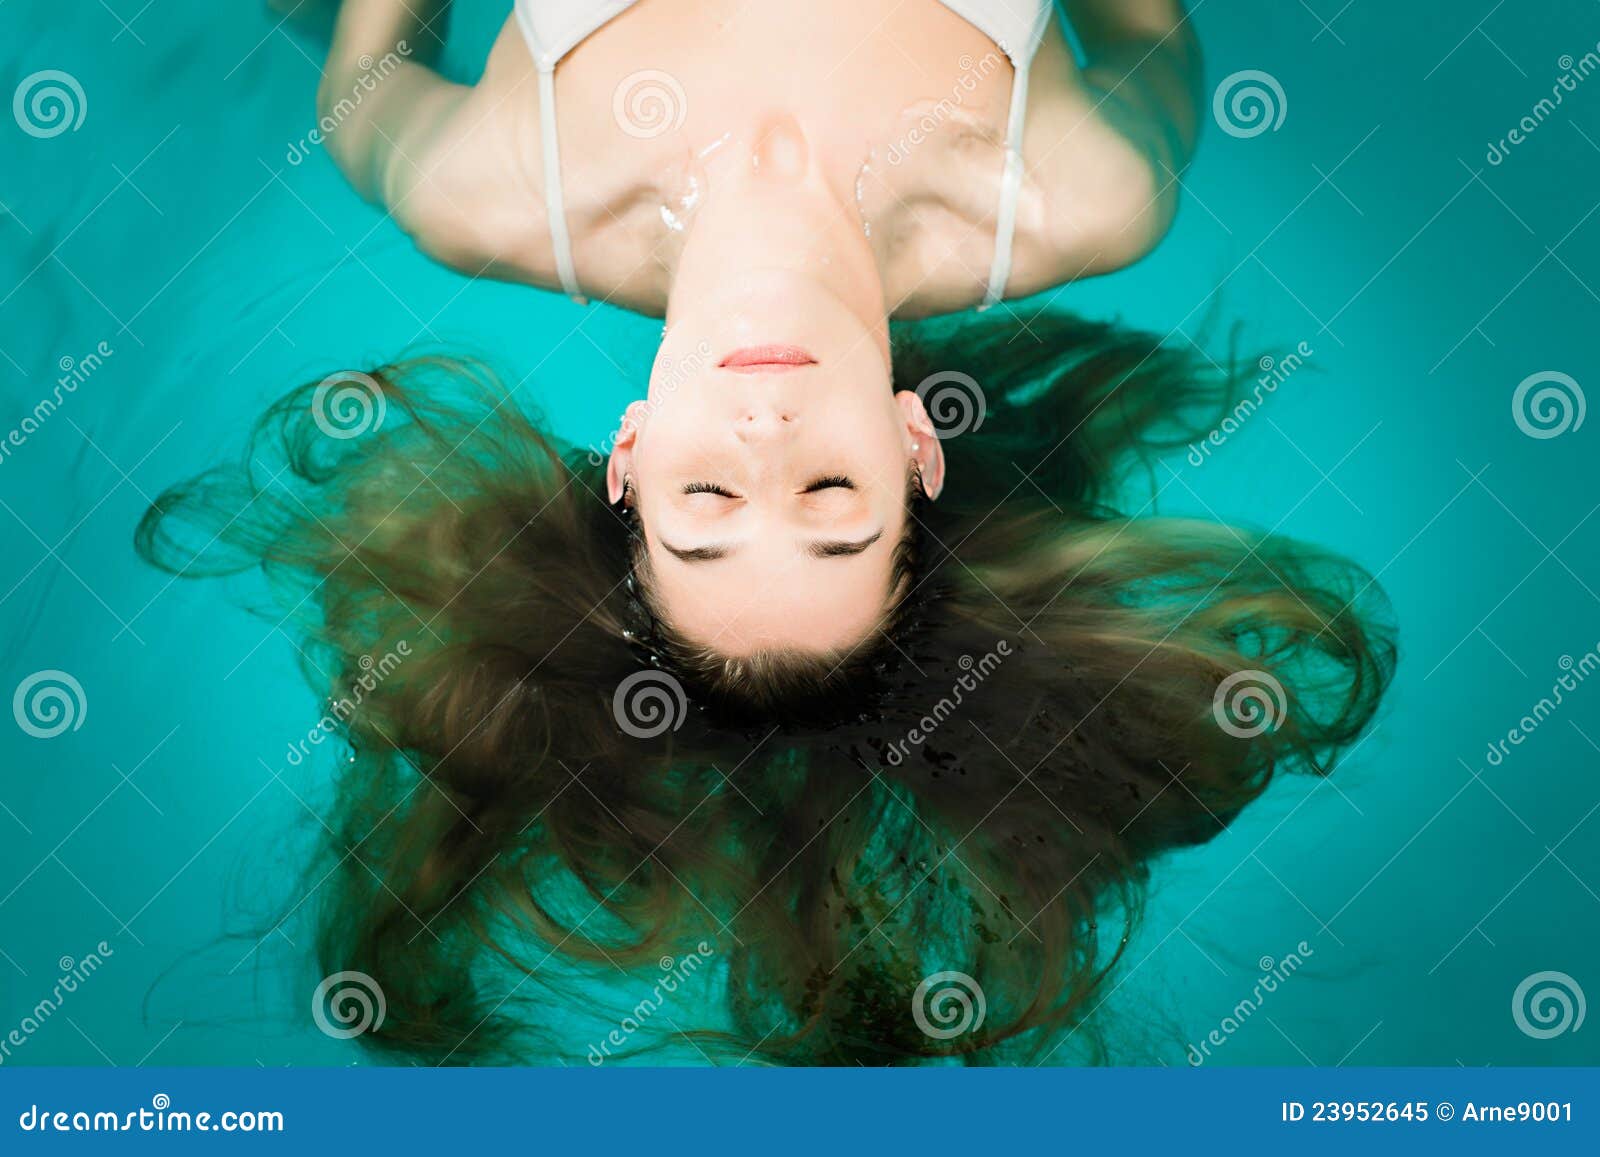 wellness - young woman floating in spa